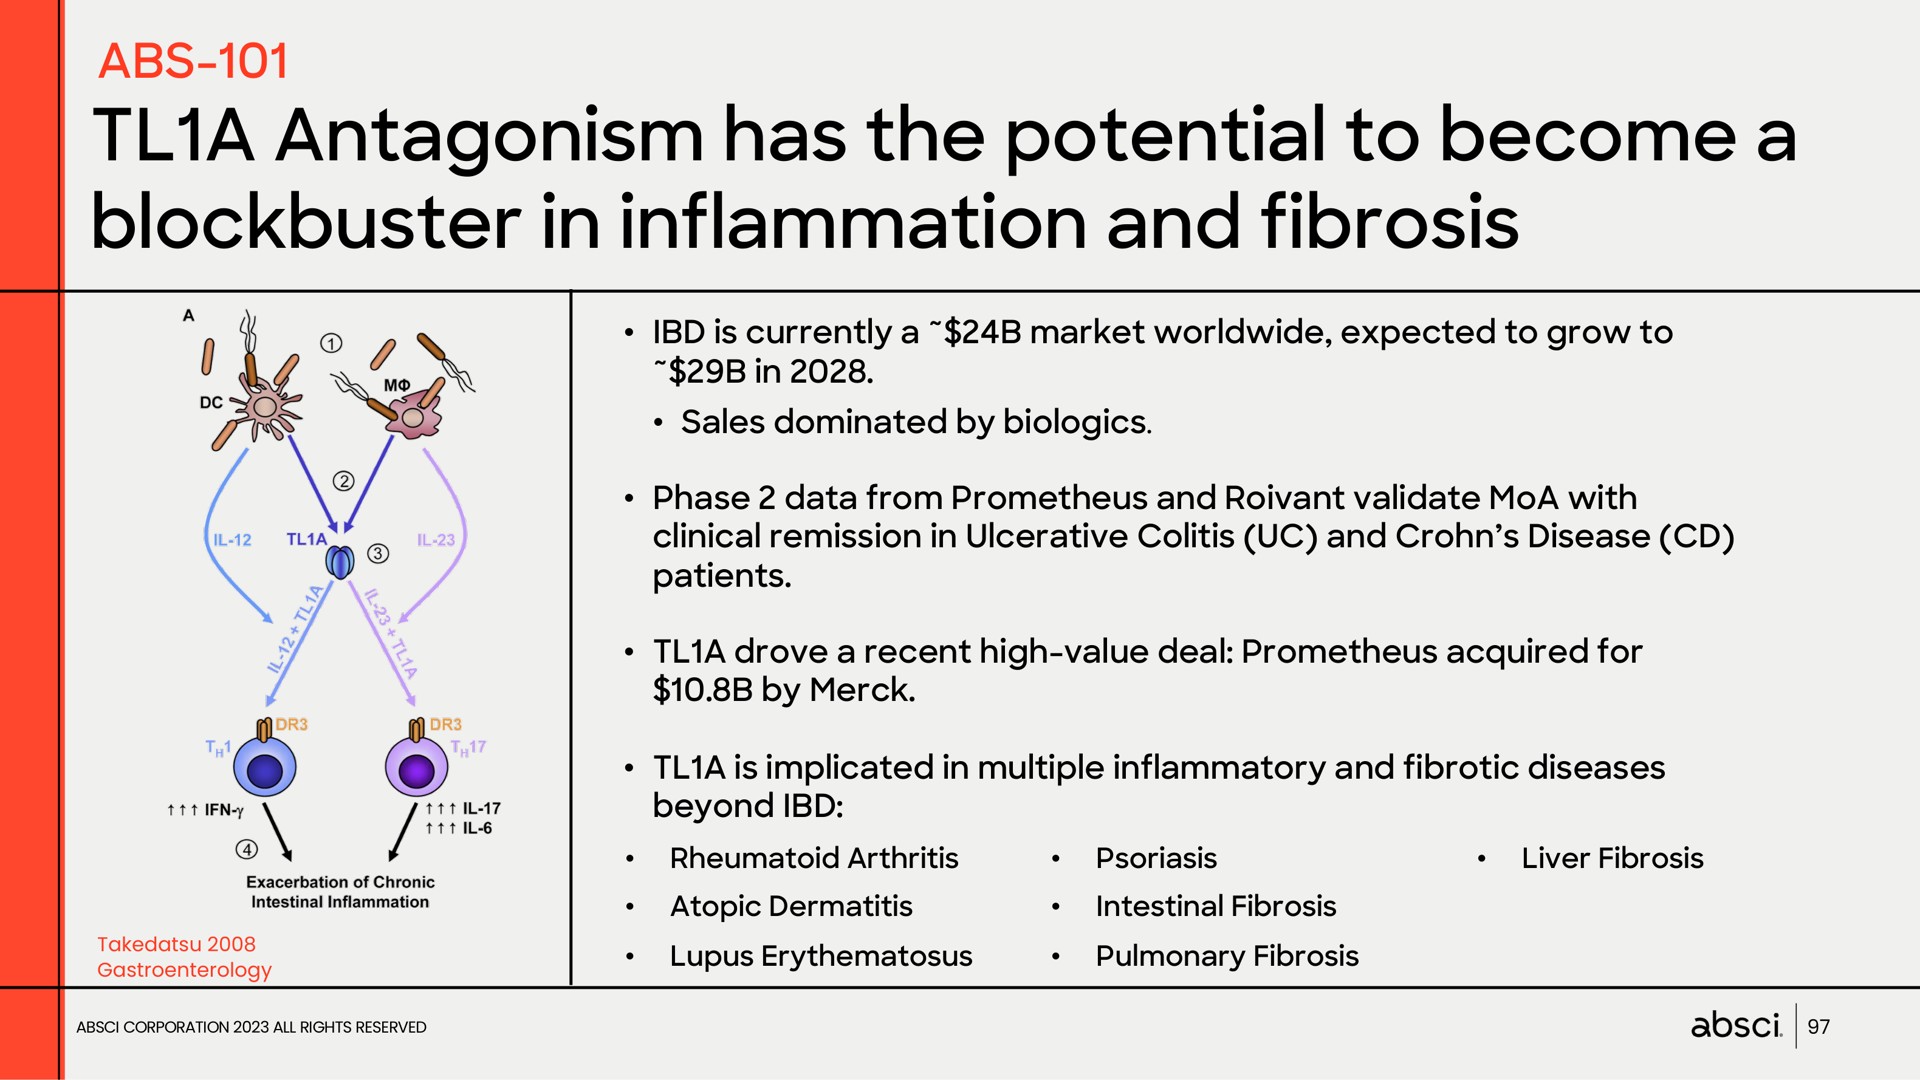 a antagonism has the potential to become a blockbuster in inflammation and fibrosis | Absci